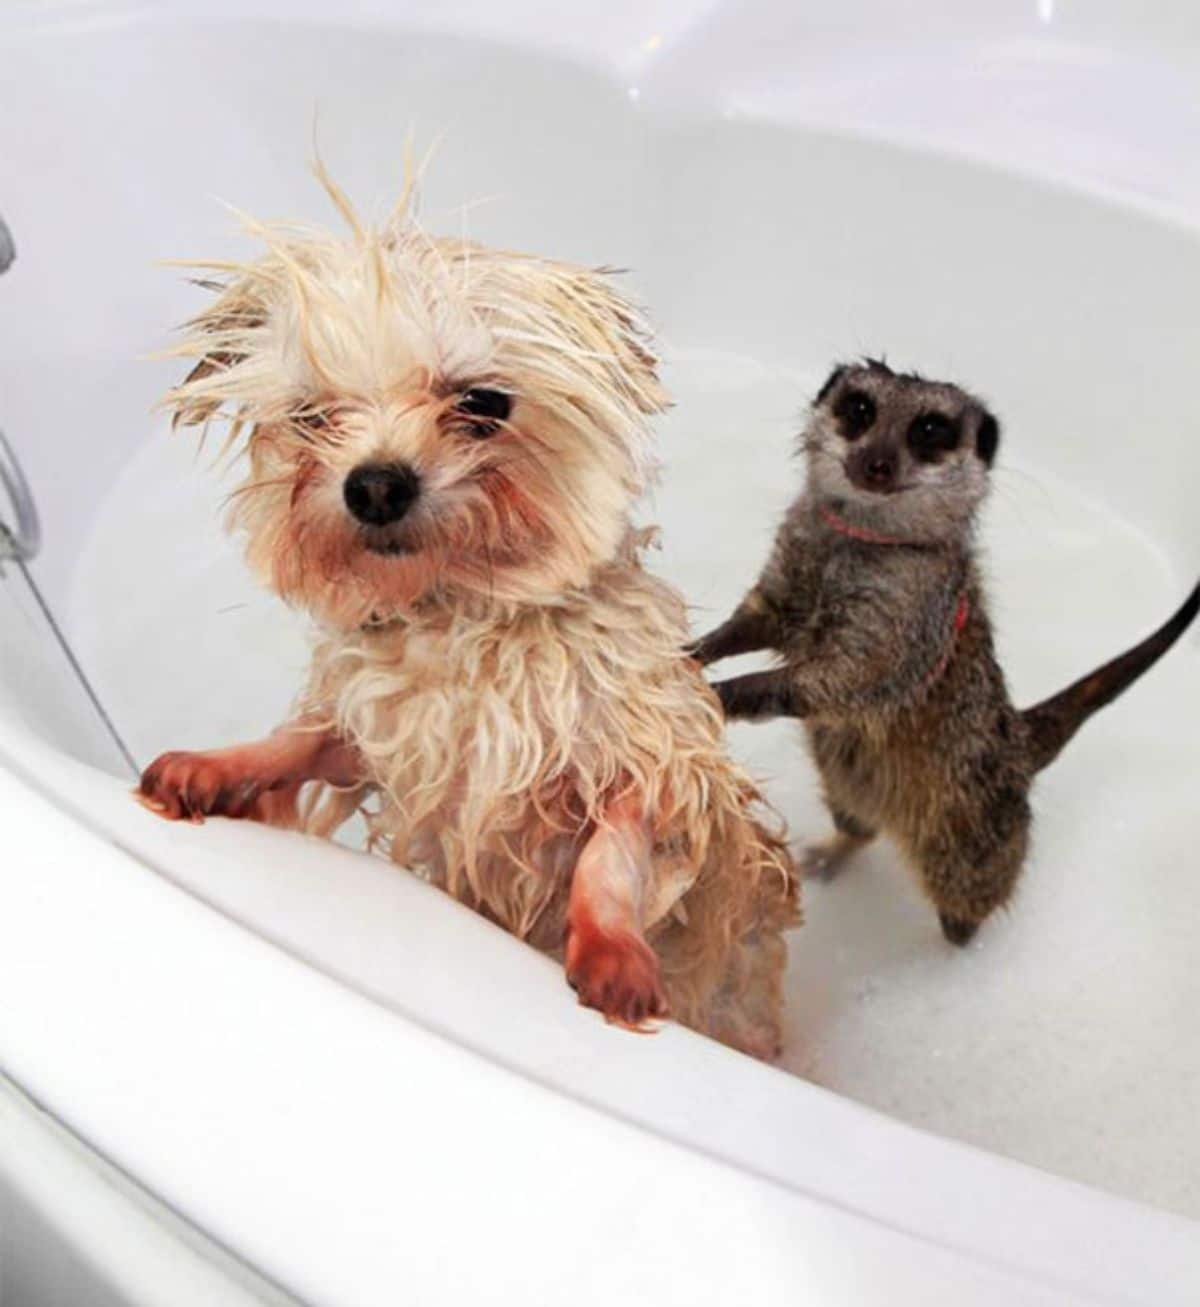 wet fluffy brown dog with a black and grey rodent-looking animal with the paws on the dog's back and both standing on hind legs